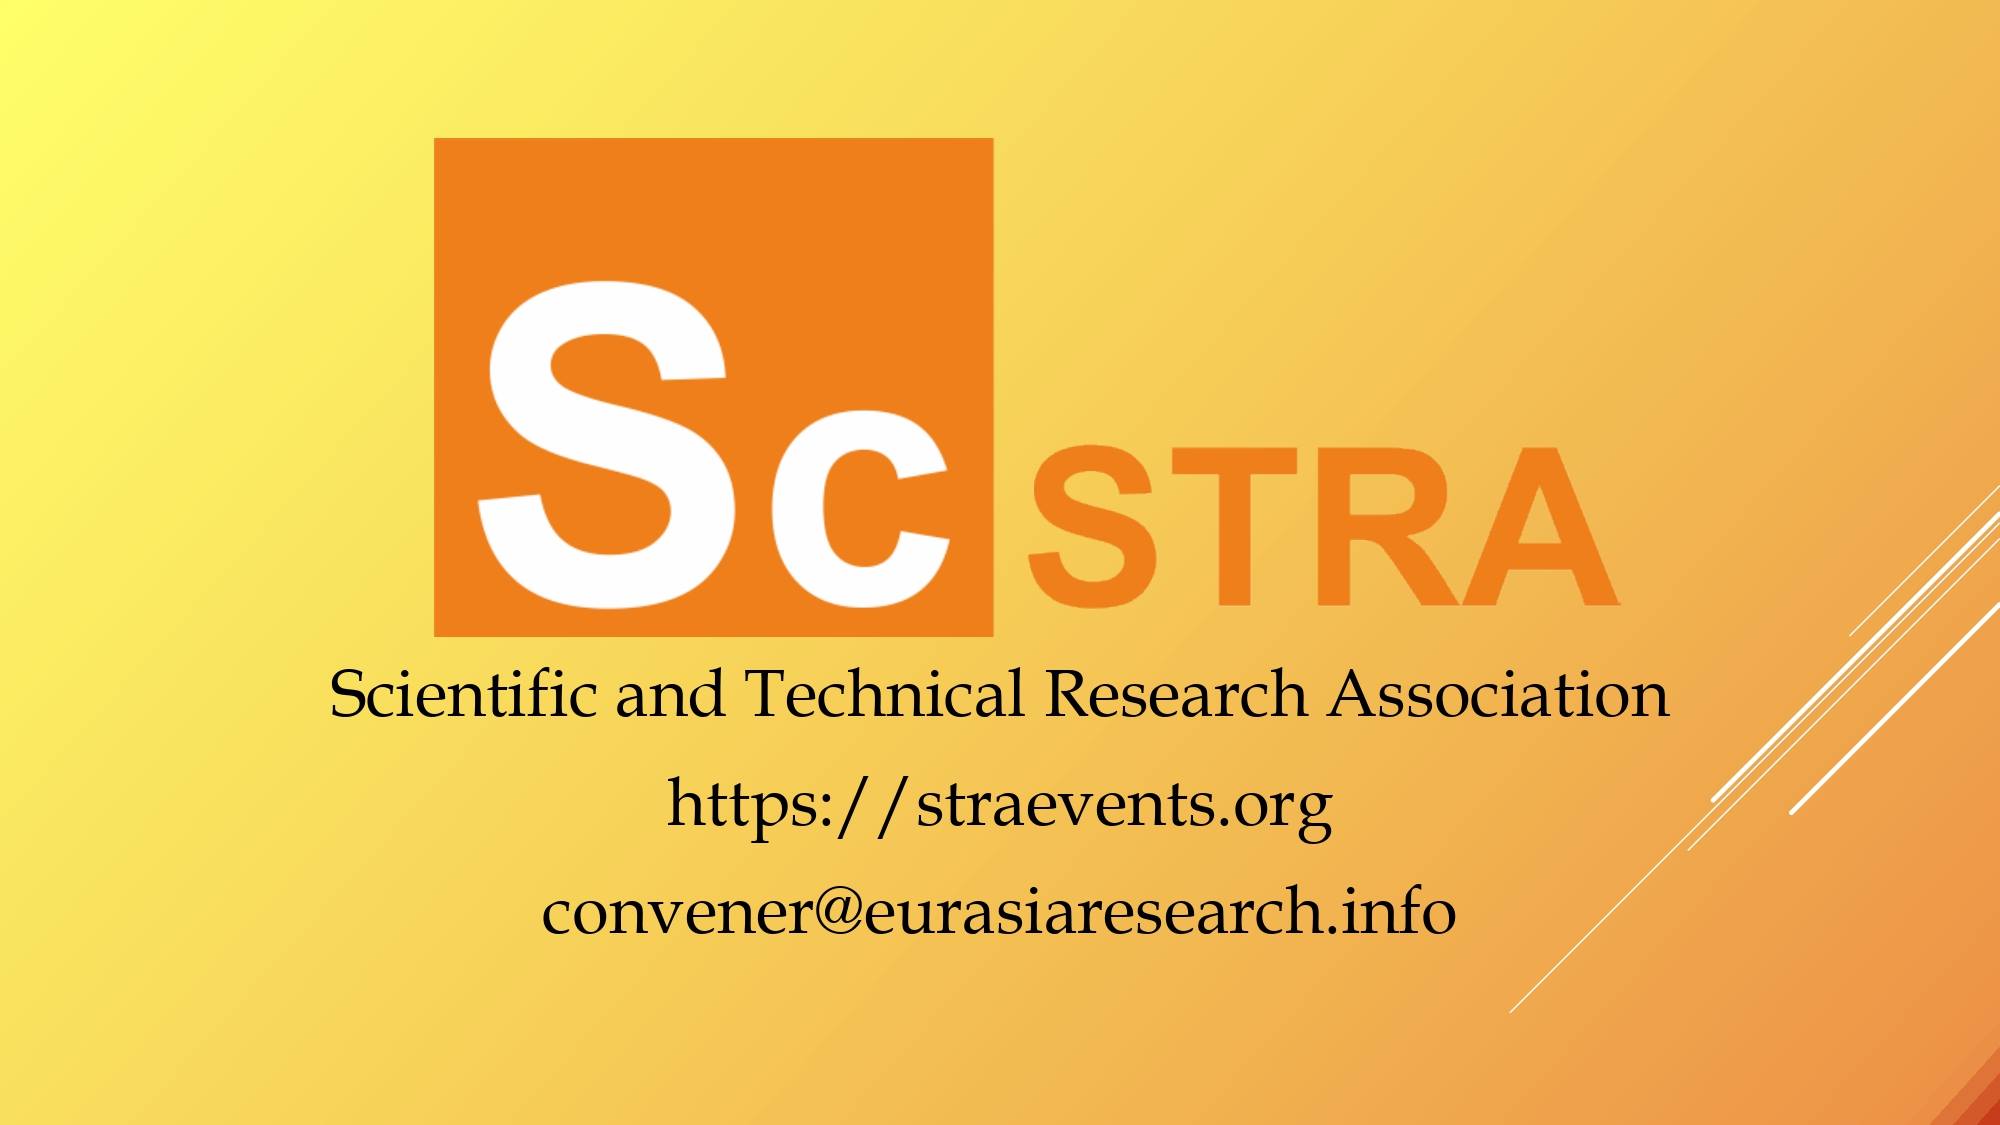 ICSTR London – International Conference on Science & Technology Research, 10-11 Dec 2020, London, United Kingdom